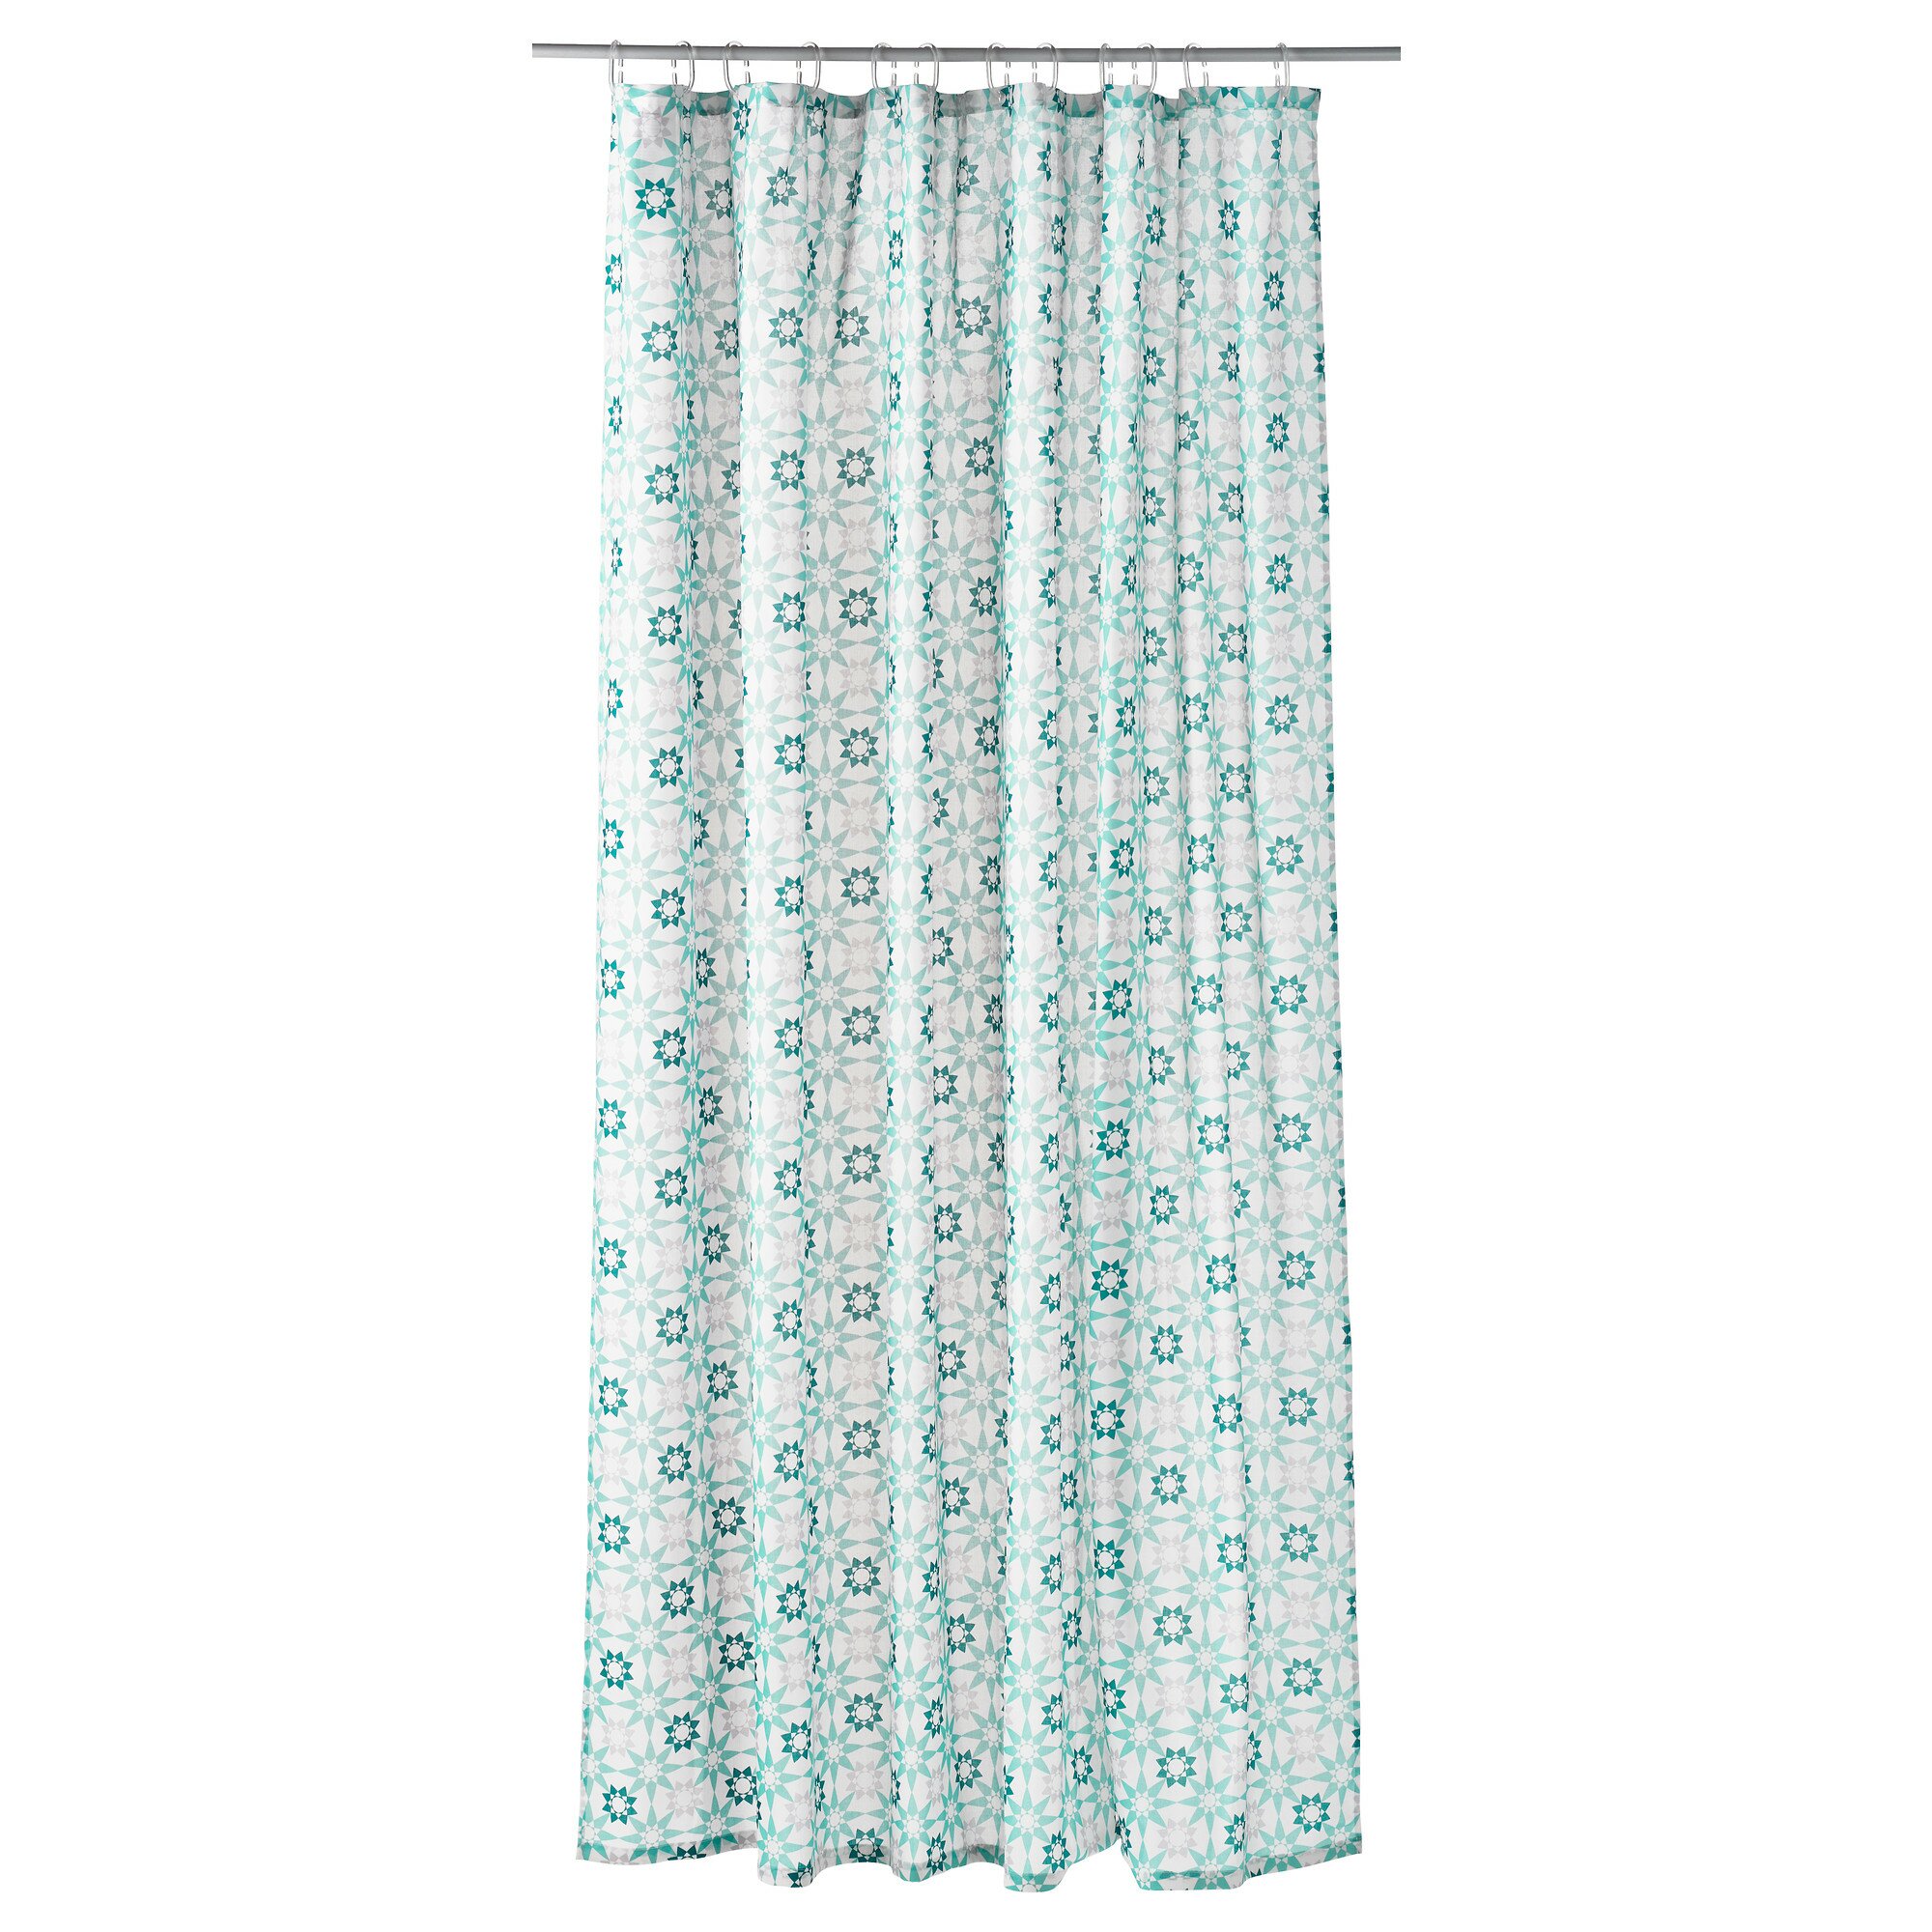 Ikea Shower Curtain | Shower Curtains Cheap | Shower Curtain with Liner